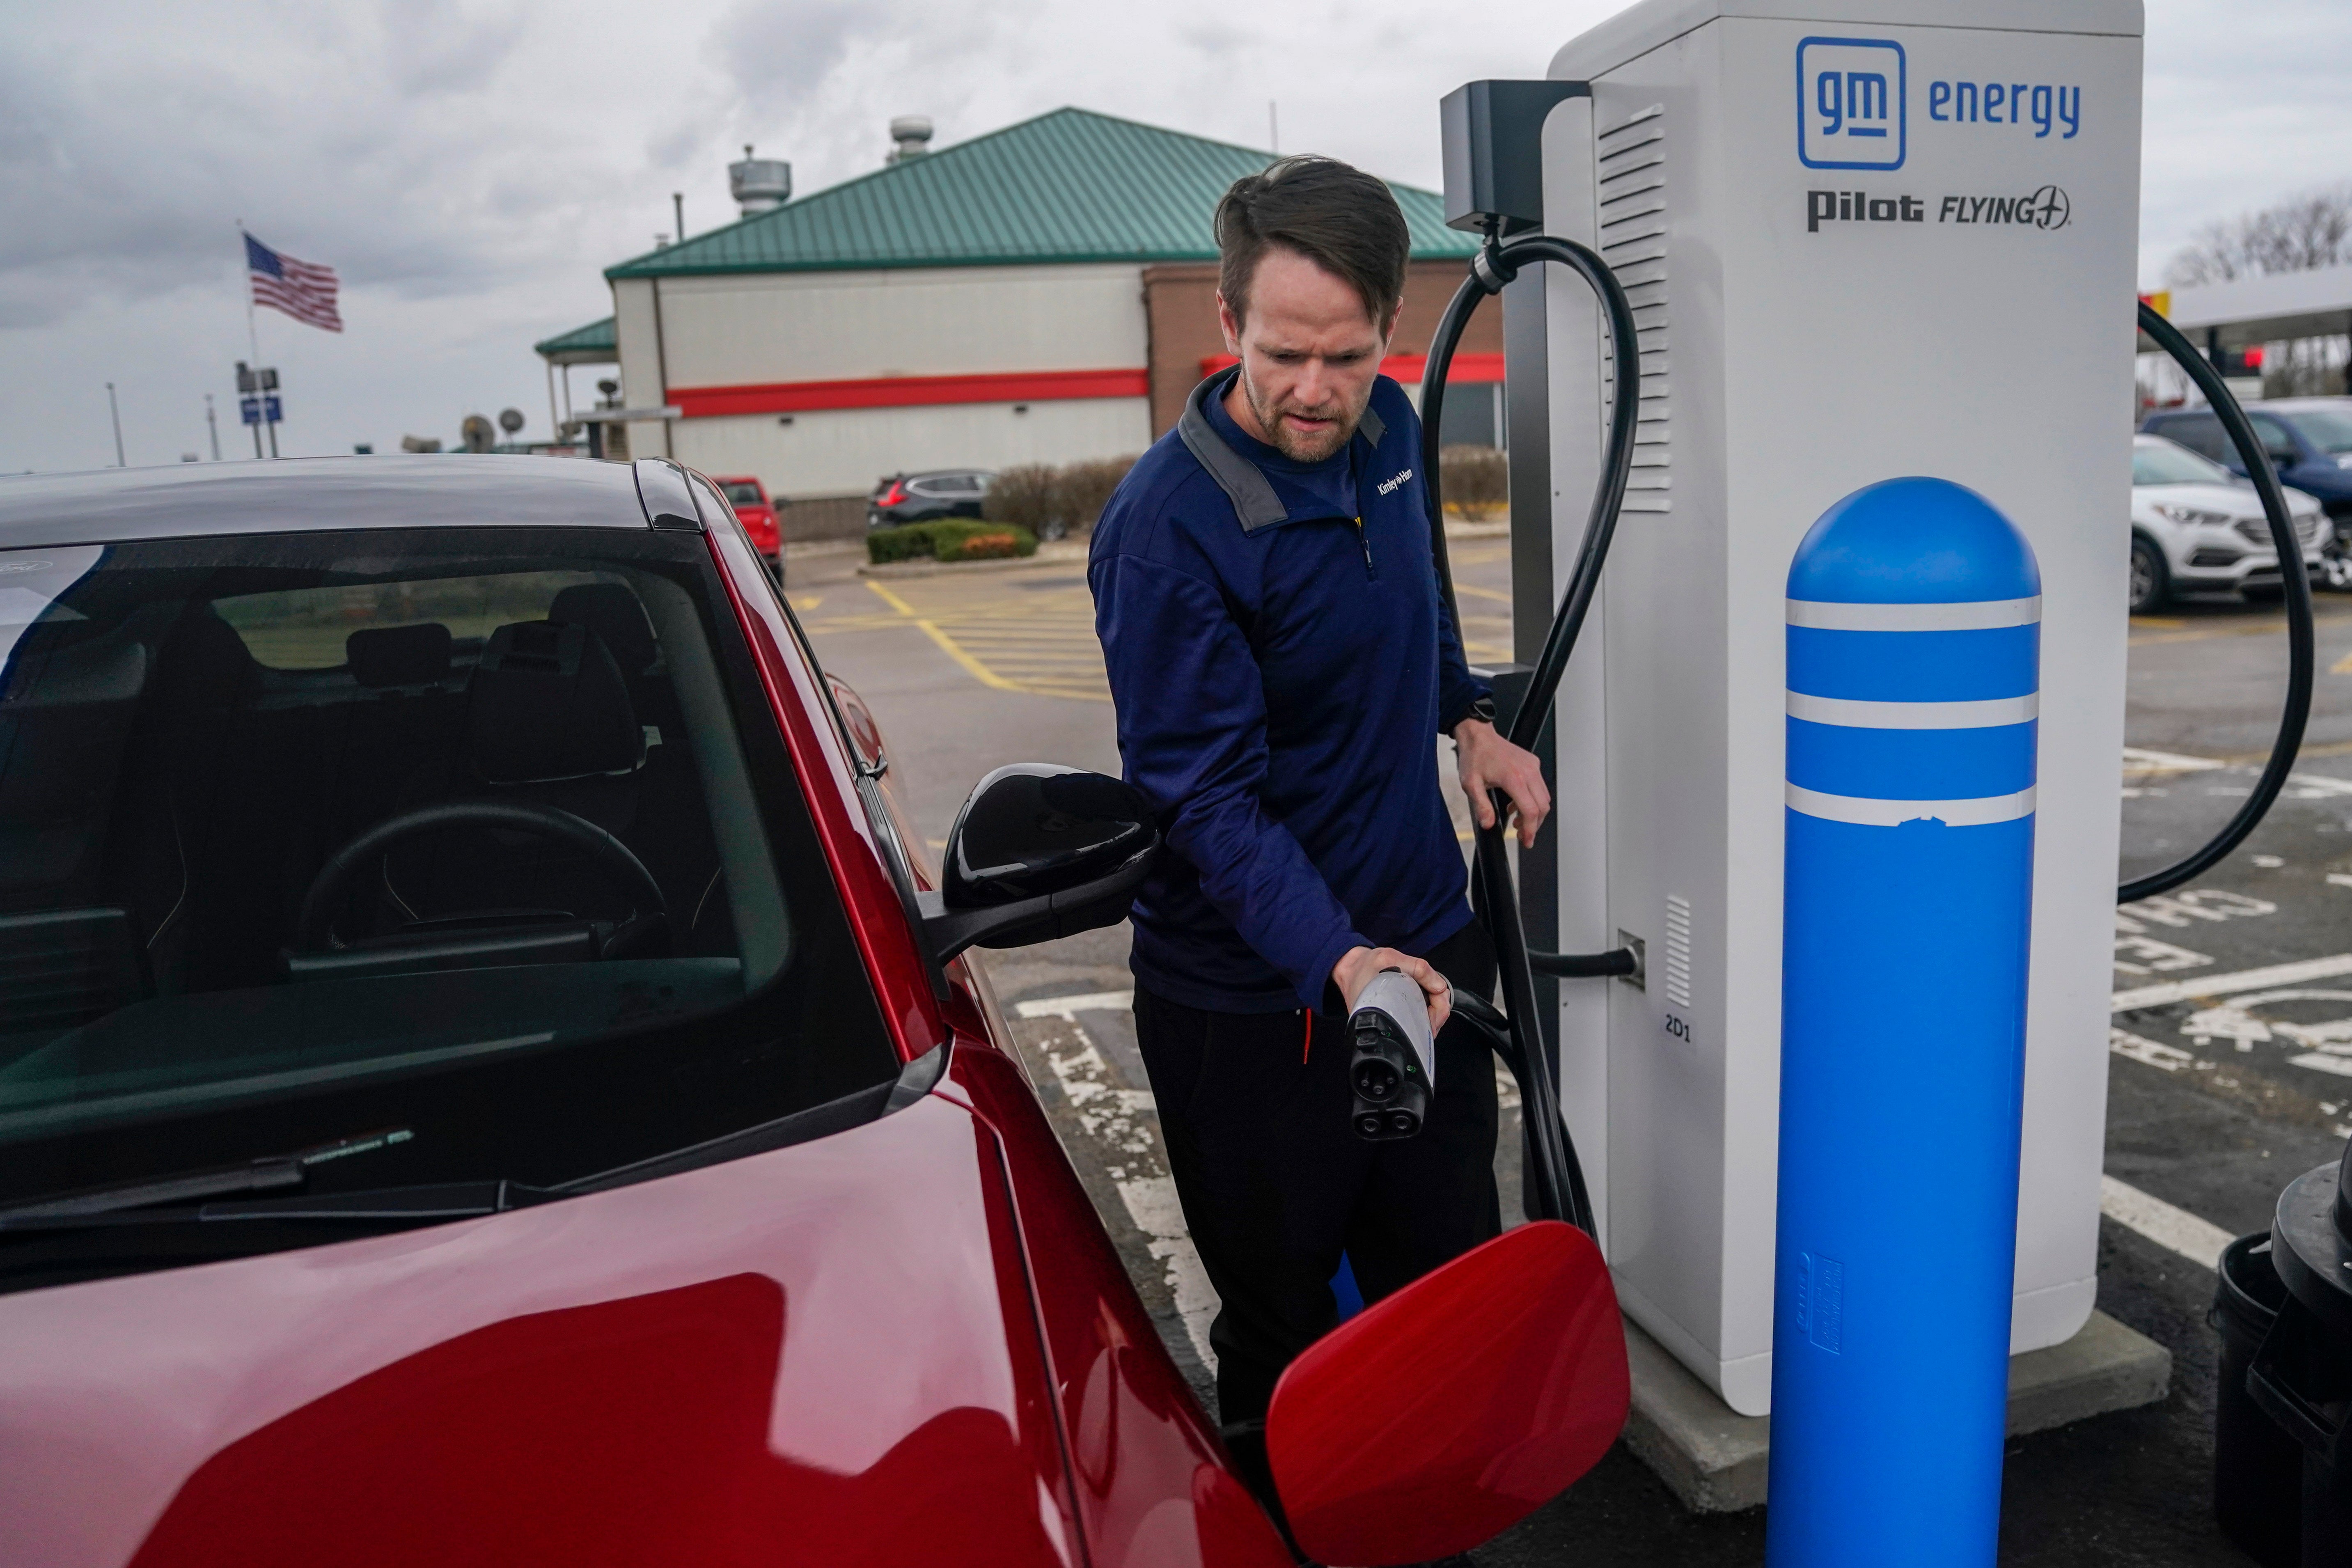 Liam Sawyer charges his Ford Mustang Mach-E, earlier this month at an electric vehicle charging station in London, Ohio. The charging ports are key to the US transition to EVs but the US government’s rollout has been slow